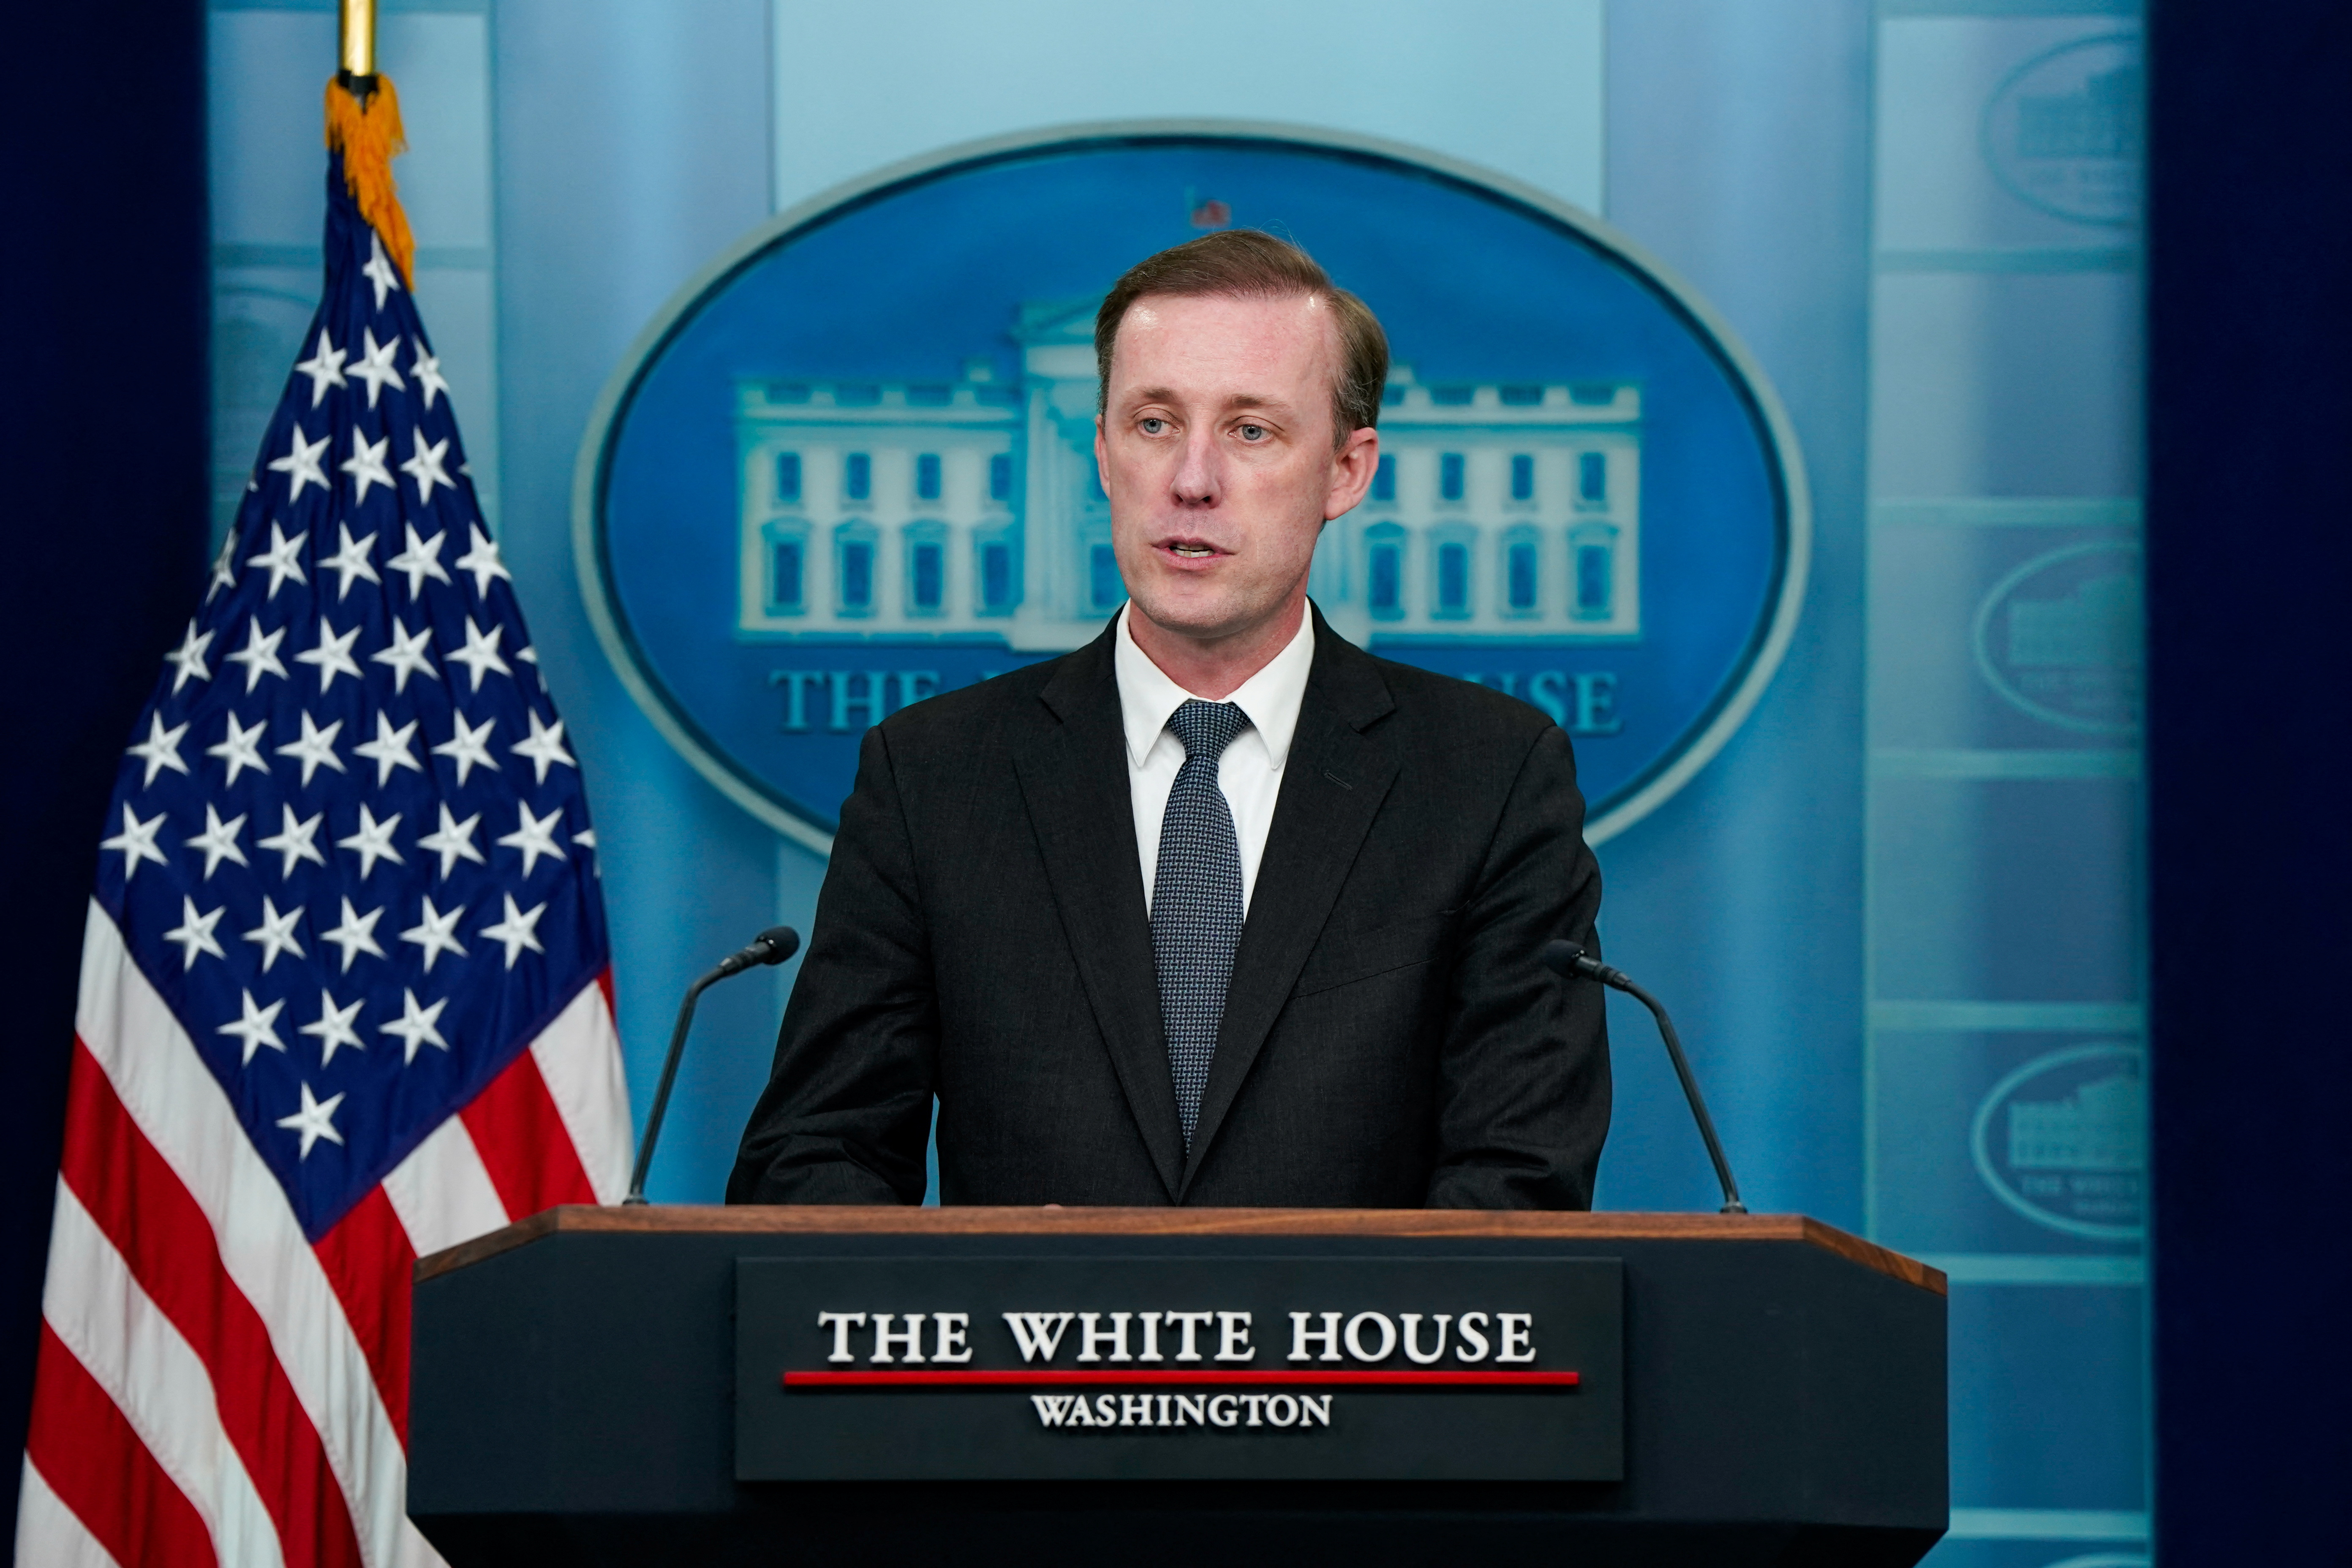 White House national security adviser Jake Sullivan speaks during a press briefing in Washington, DC, on May 13.